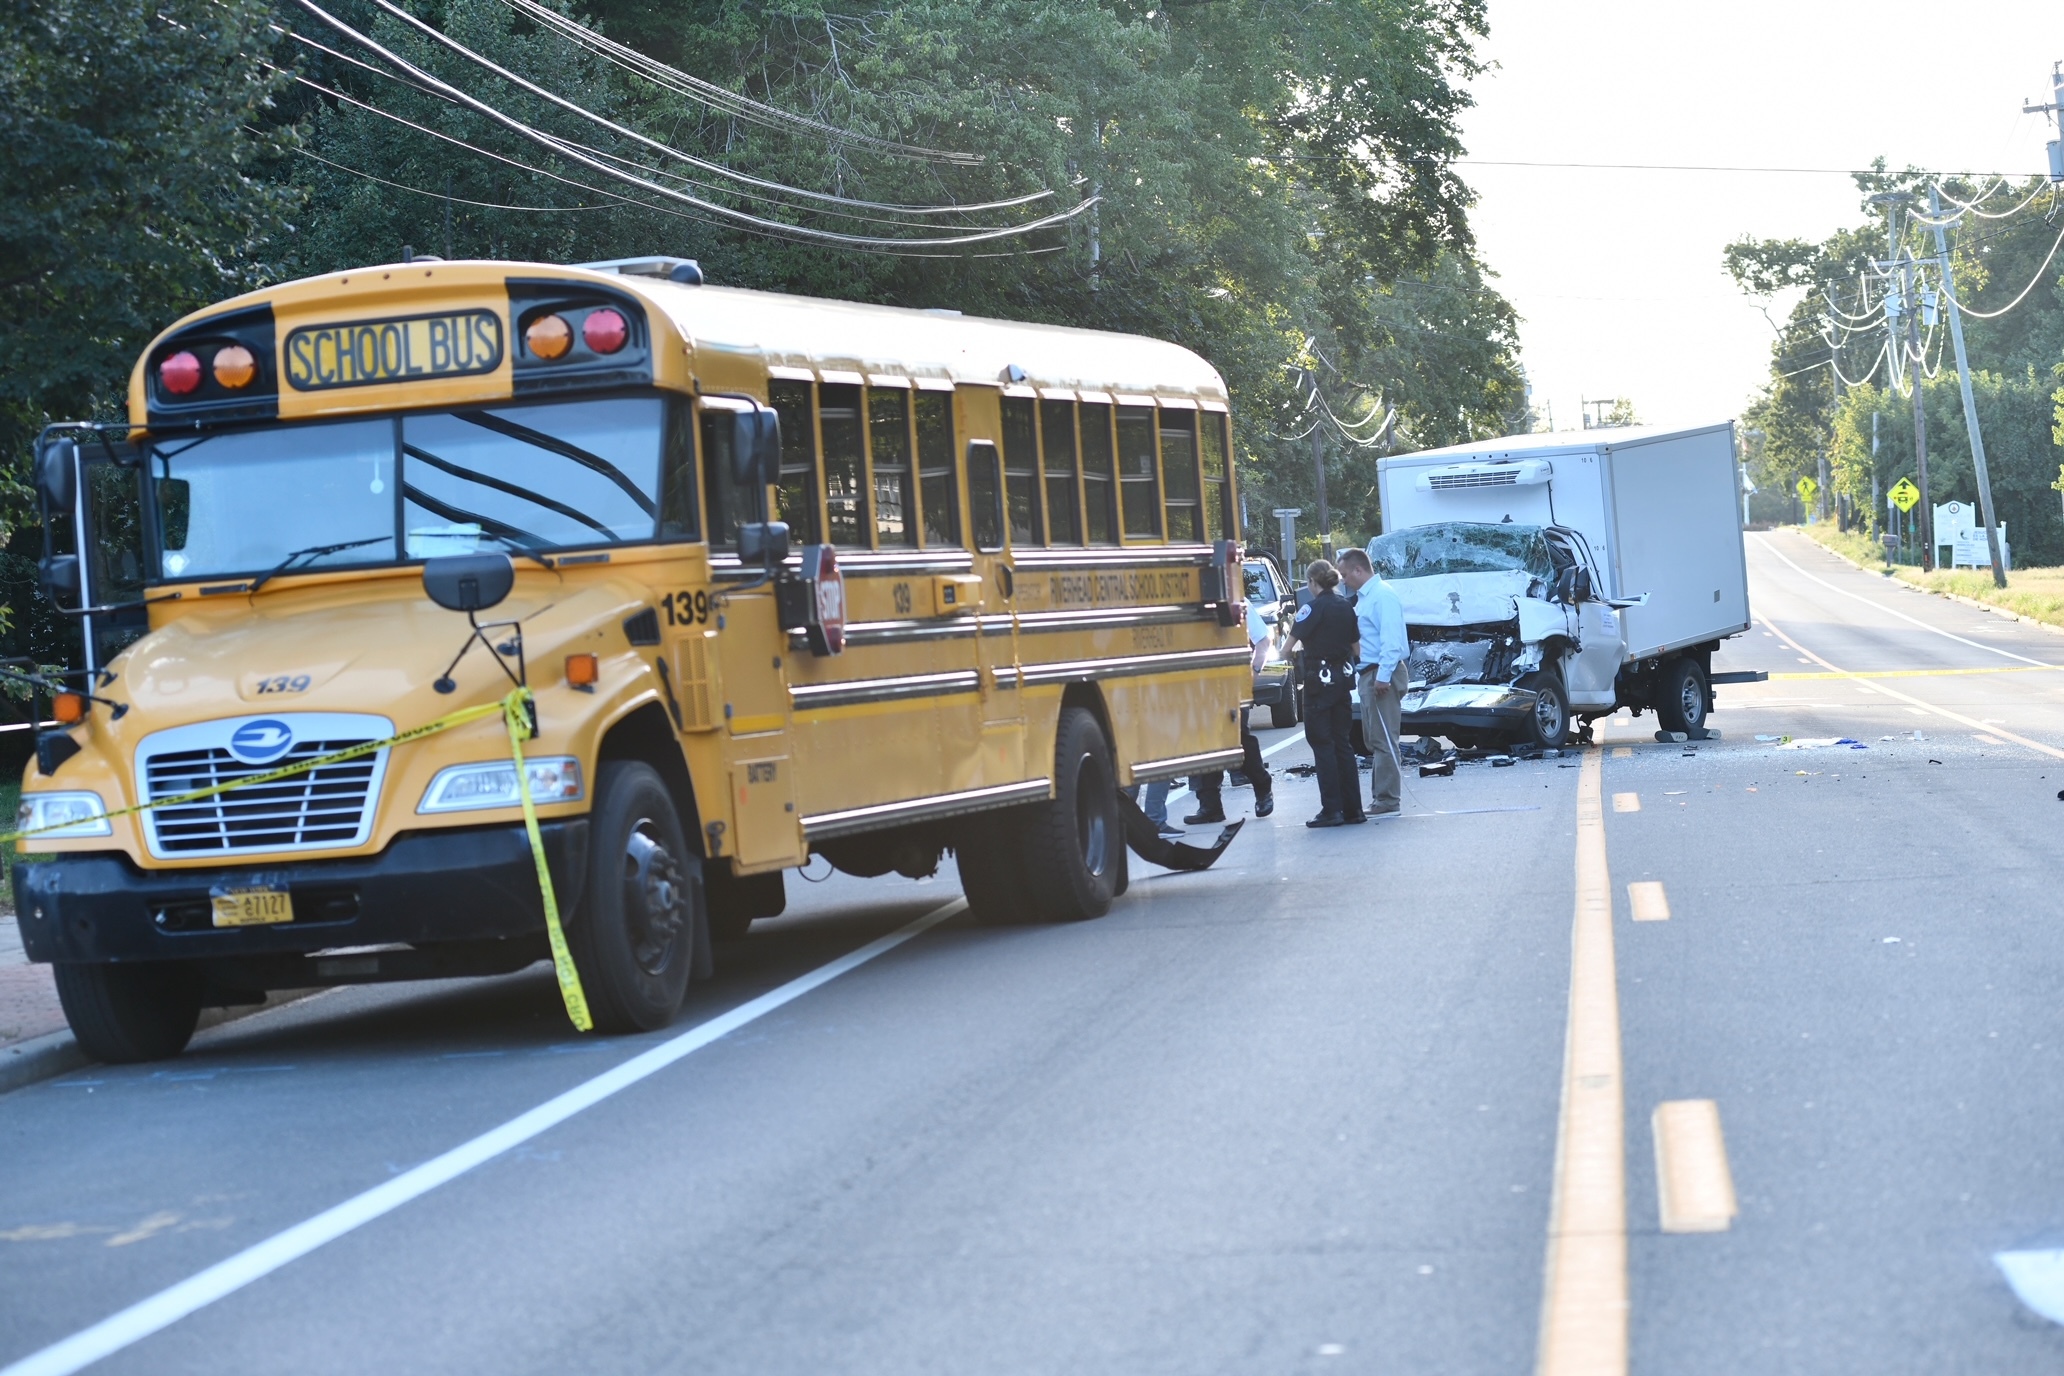 A box truck rear-ended a school bus on Flanders Road on Monday afternoon.